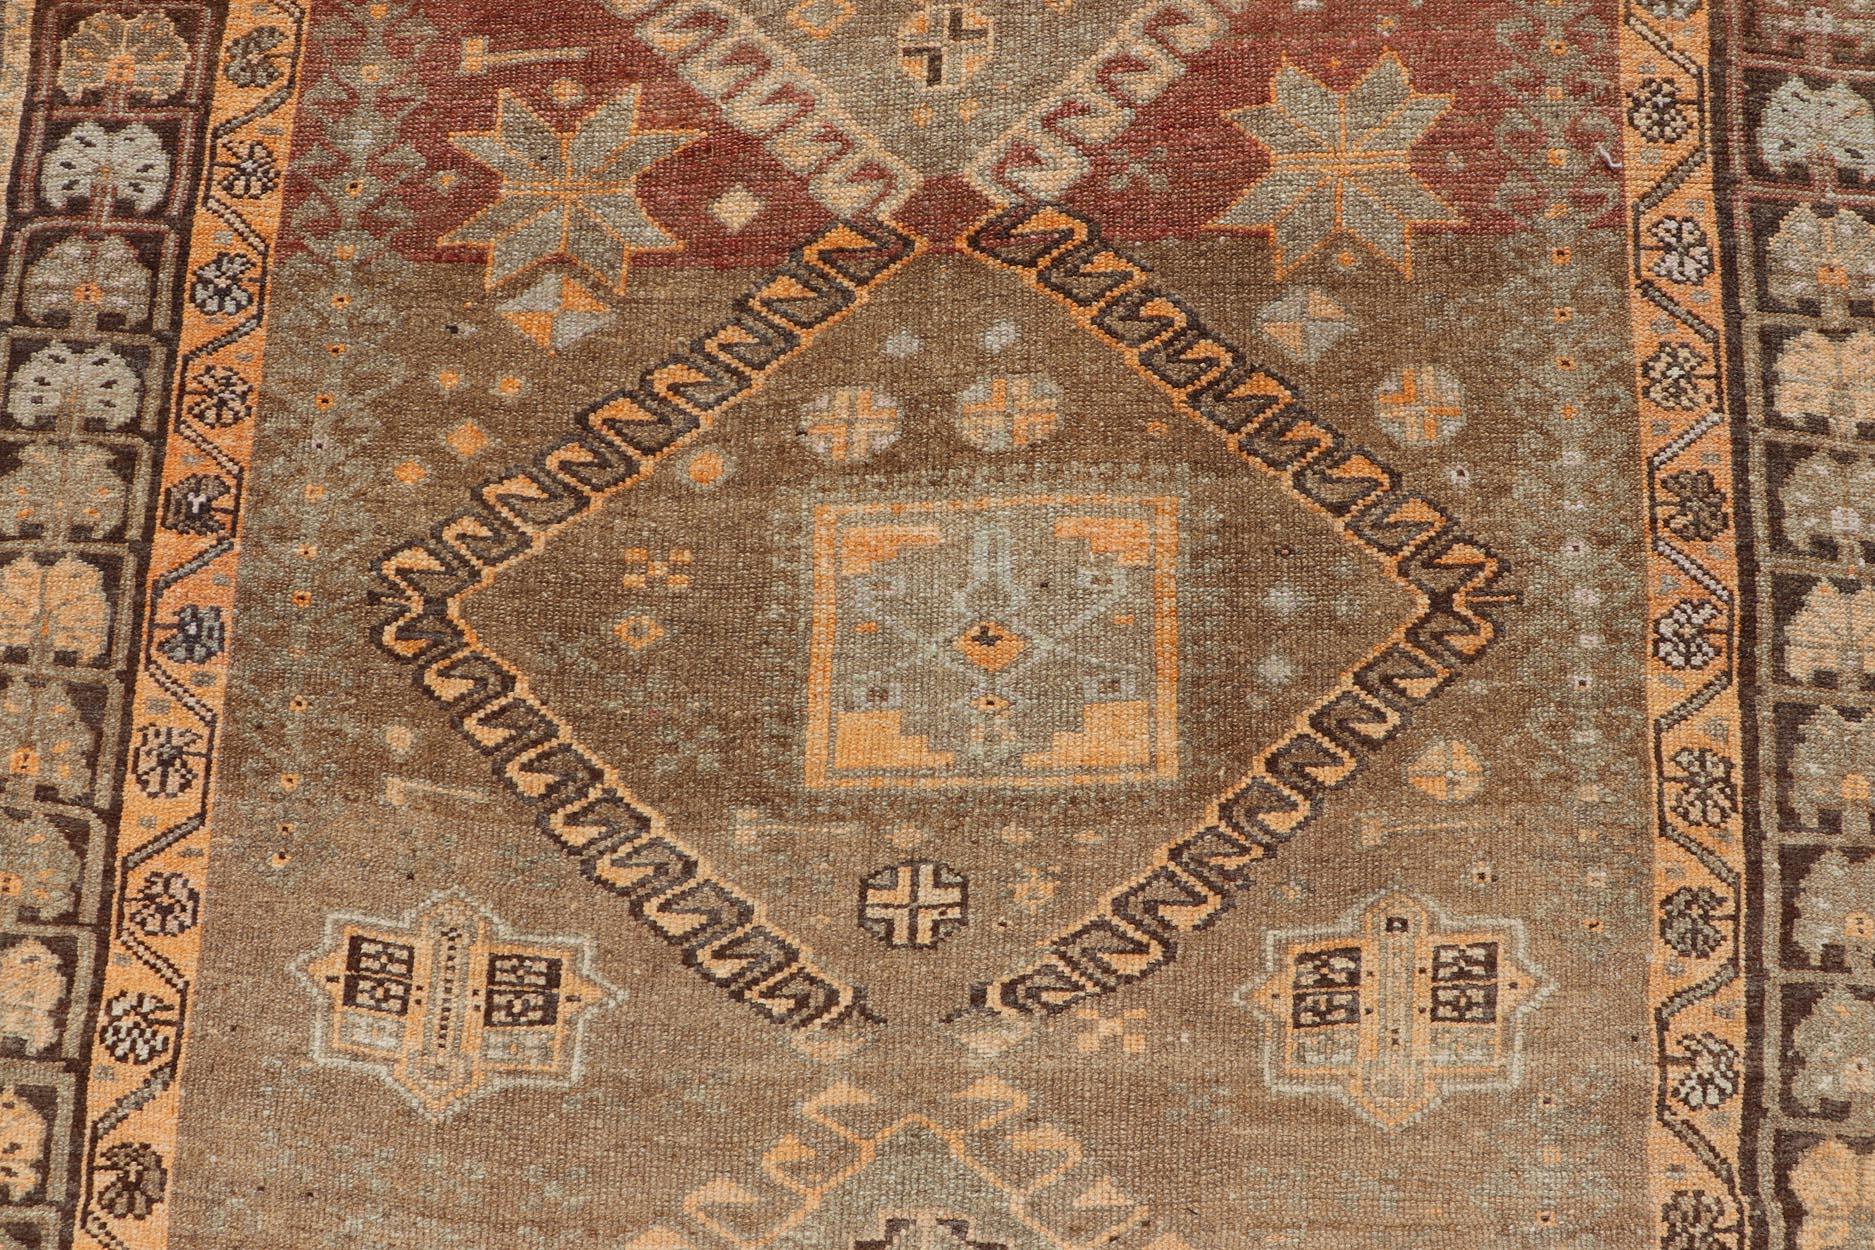 This antique Turkish Kars rug has been hand-knotted in wool and features an all-over, sub-geometric diamond design rendered in orange and earthy tones. A complementary, multi-tiered border encompasses the entirety of the piece; making it a marvelous